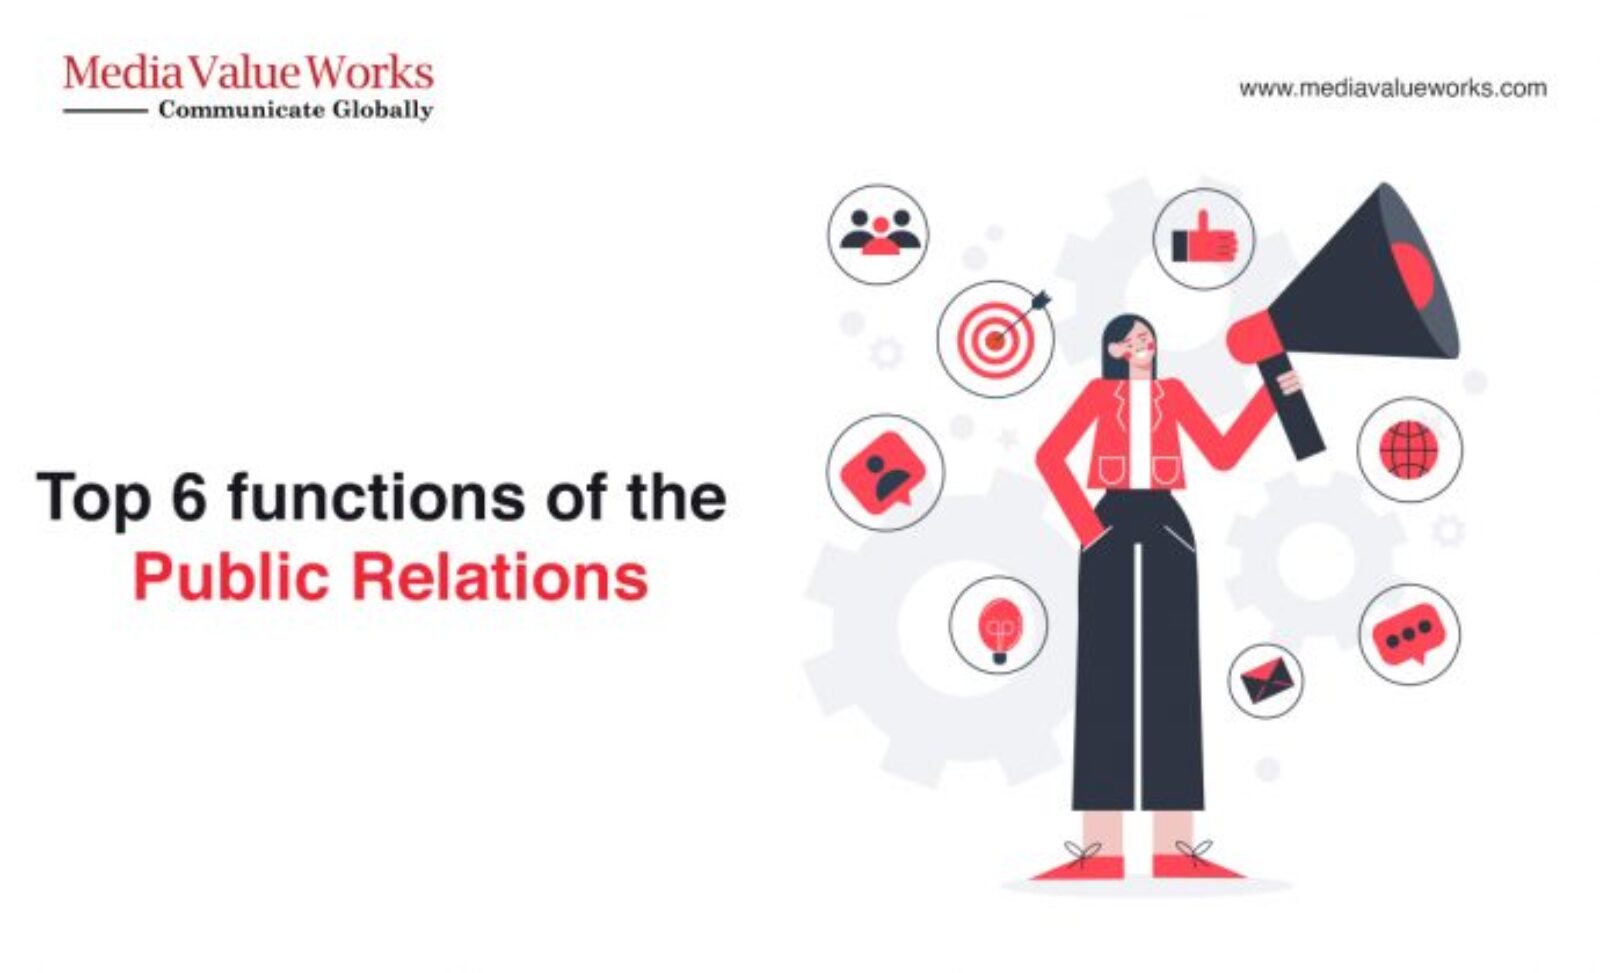 Top 6 Functions of the Public Relations